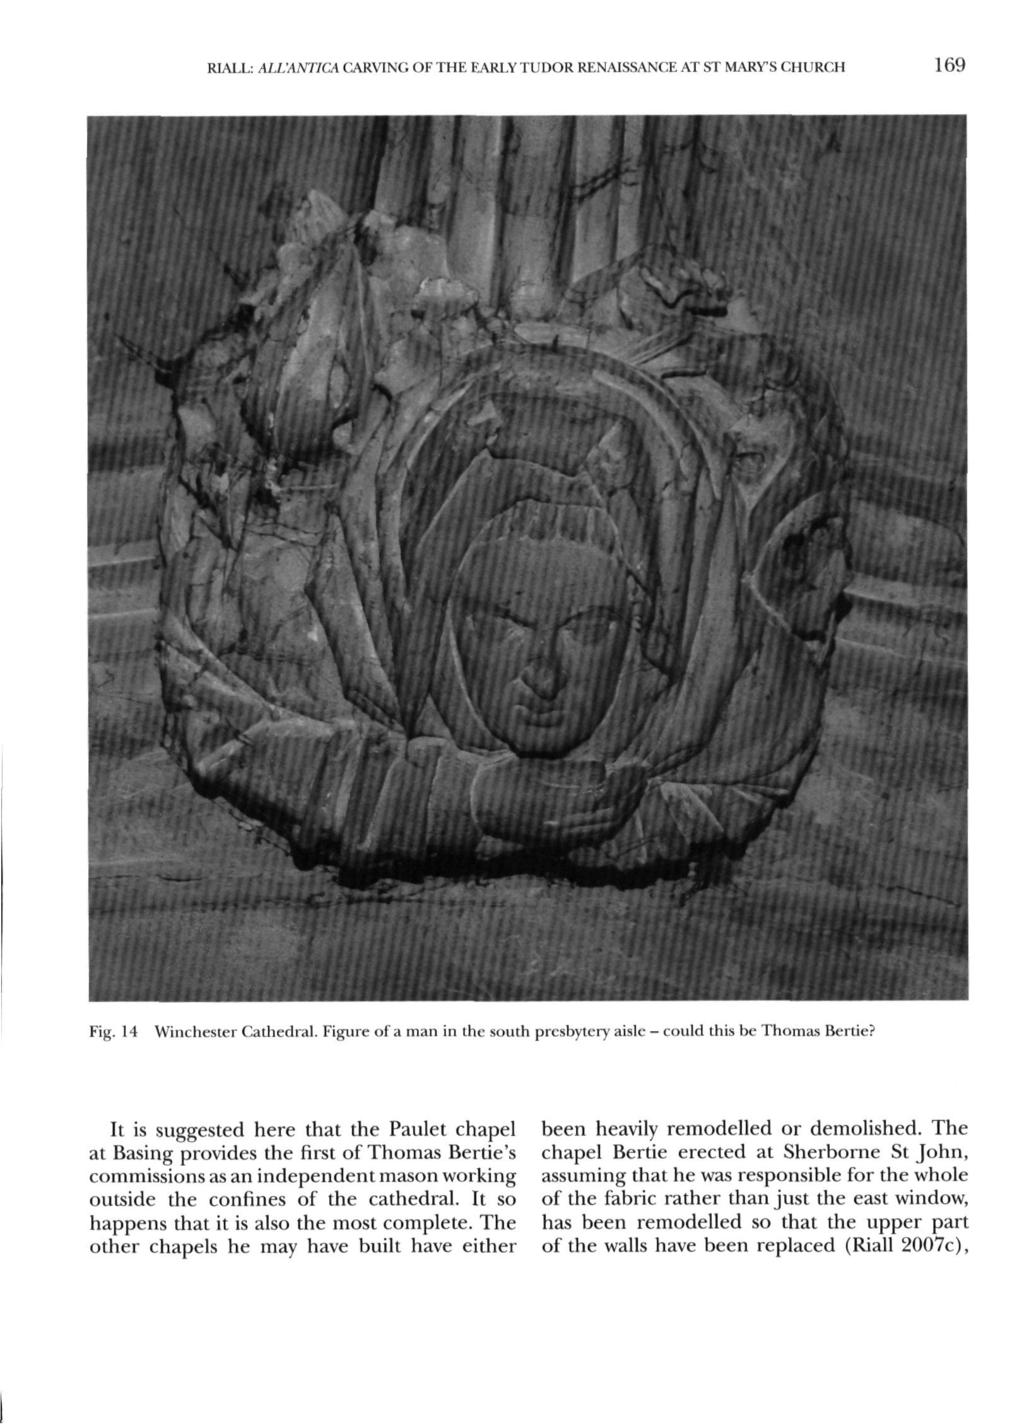 RIALL: ALL'ANTICA CARVING OF THE EARLY TUDOR RENAISSANCE AT ST MARY'S CHURCH 169 Fig. 14 Winchester Cathedral. Figure of a man in the south presbyter)' aisle - could this be Thomas Bertie?